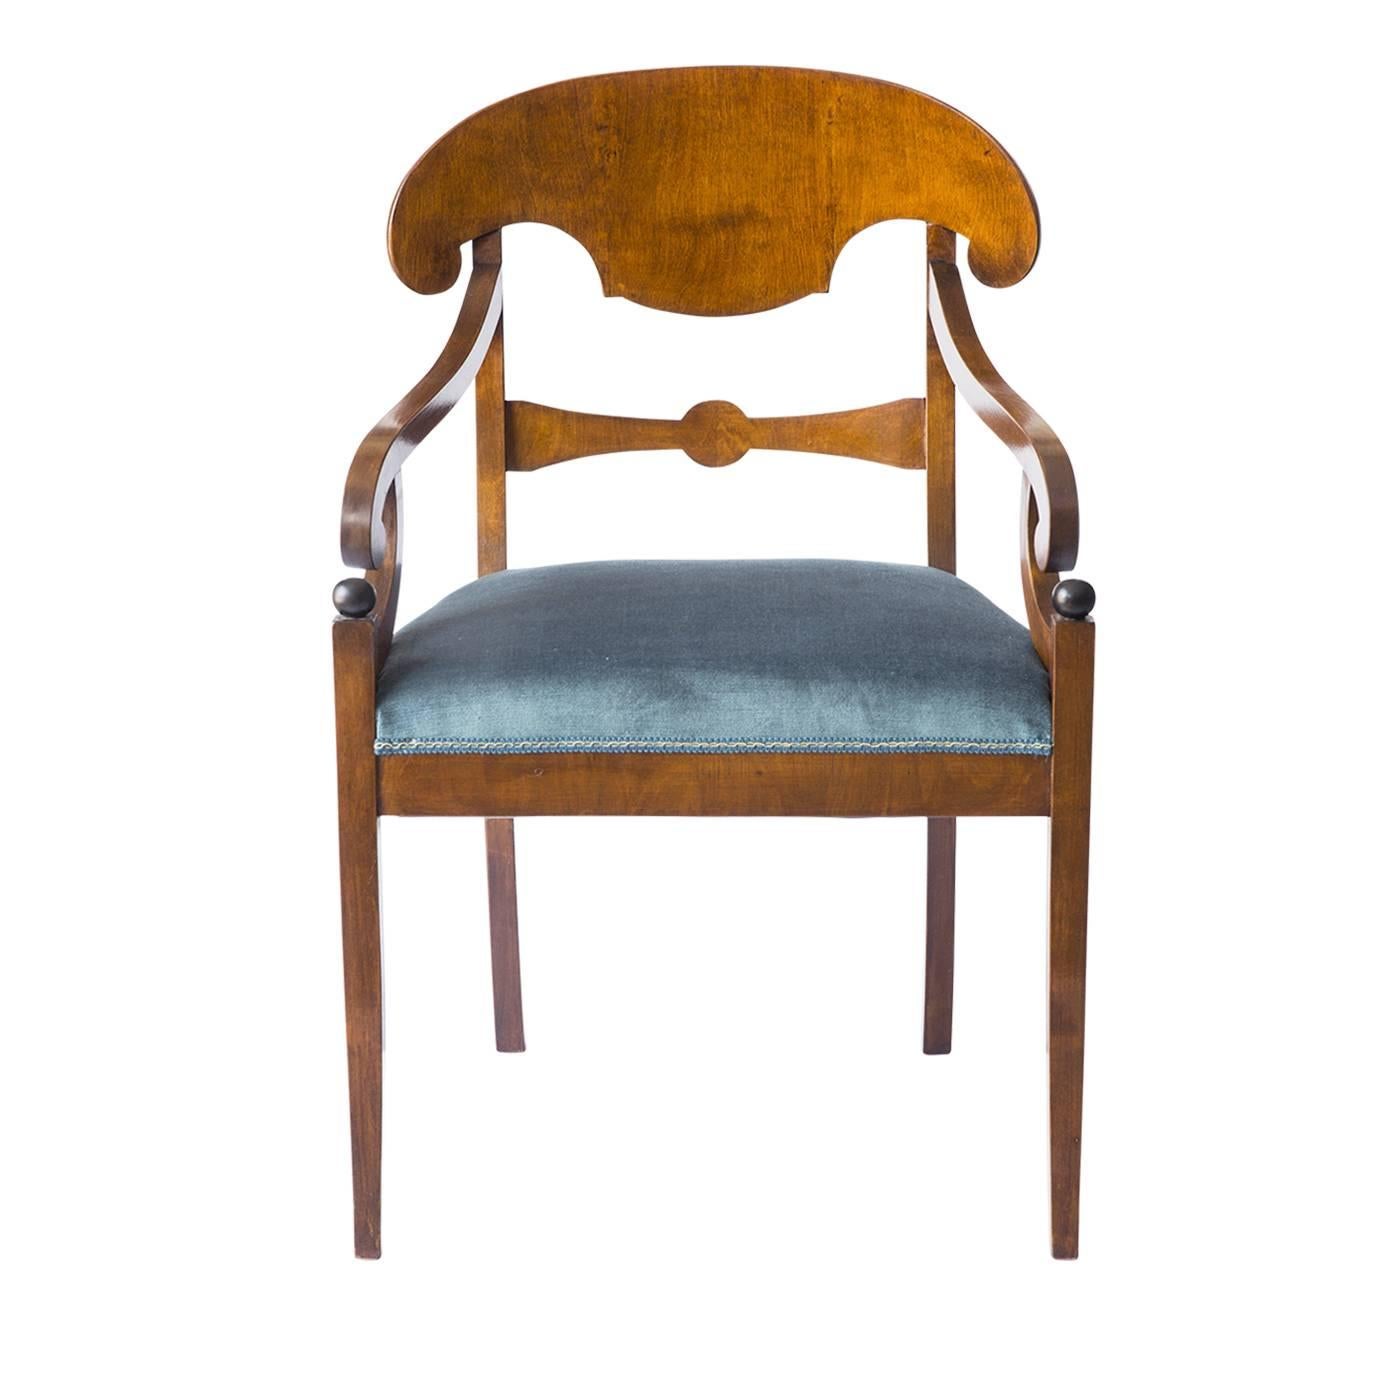 Refined Biedermeier style seats with cross sitting and fixed spring upholstery, featuring handmade polished shellac, delicately crafted in maple wood with a walnut wood veneering. Perfect for dignified interiors and antique lovers, these arm chairs